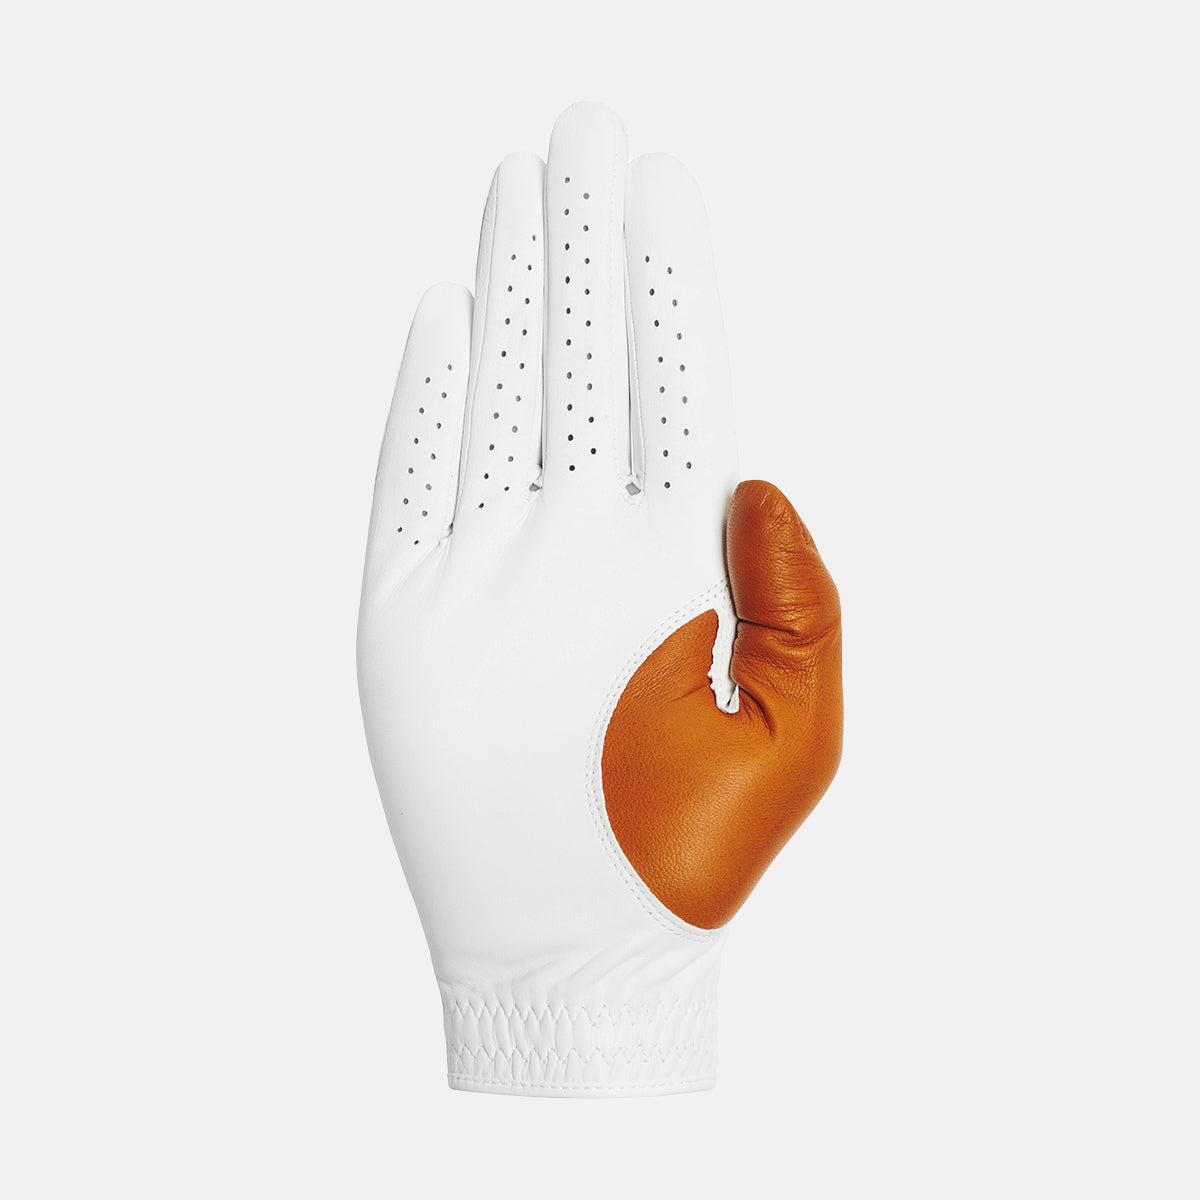 The Elite Pro Laguna Right-hand golf glove for the left-handed player made from 100% Premium Cabretta leather